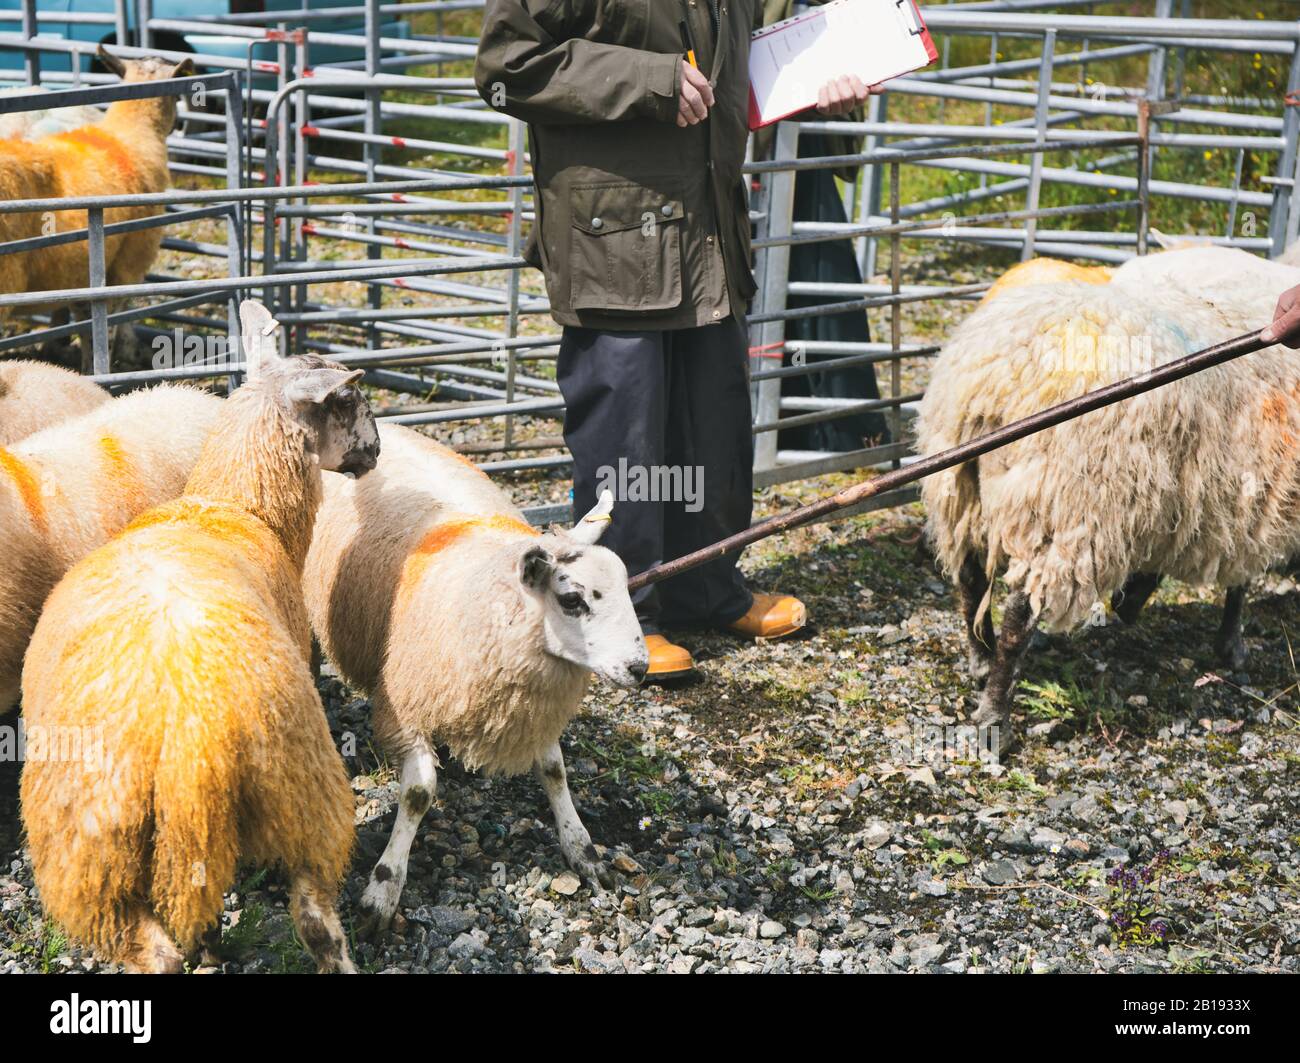 Sheep judging at North Harris Agricultural Show, Tarbert, Isle of Harris, Outer Hebrides, Scotland Stock Photo